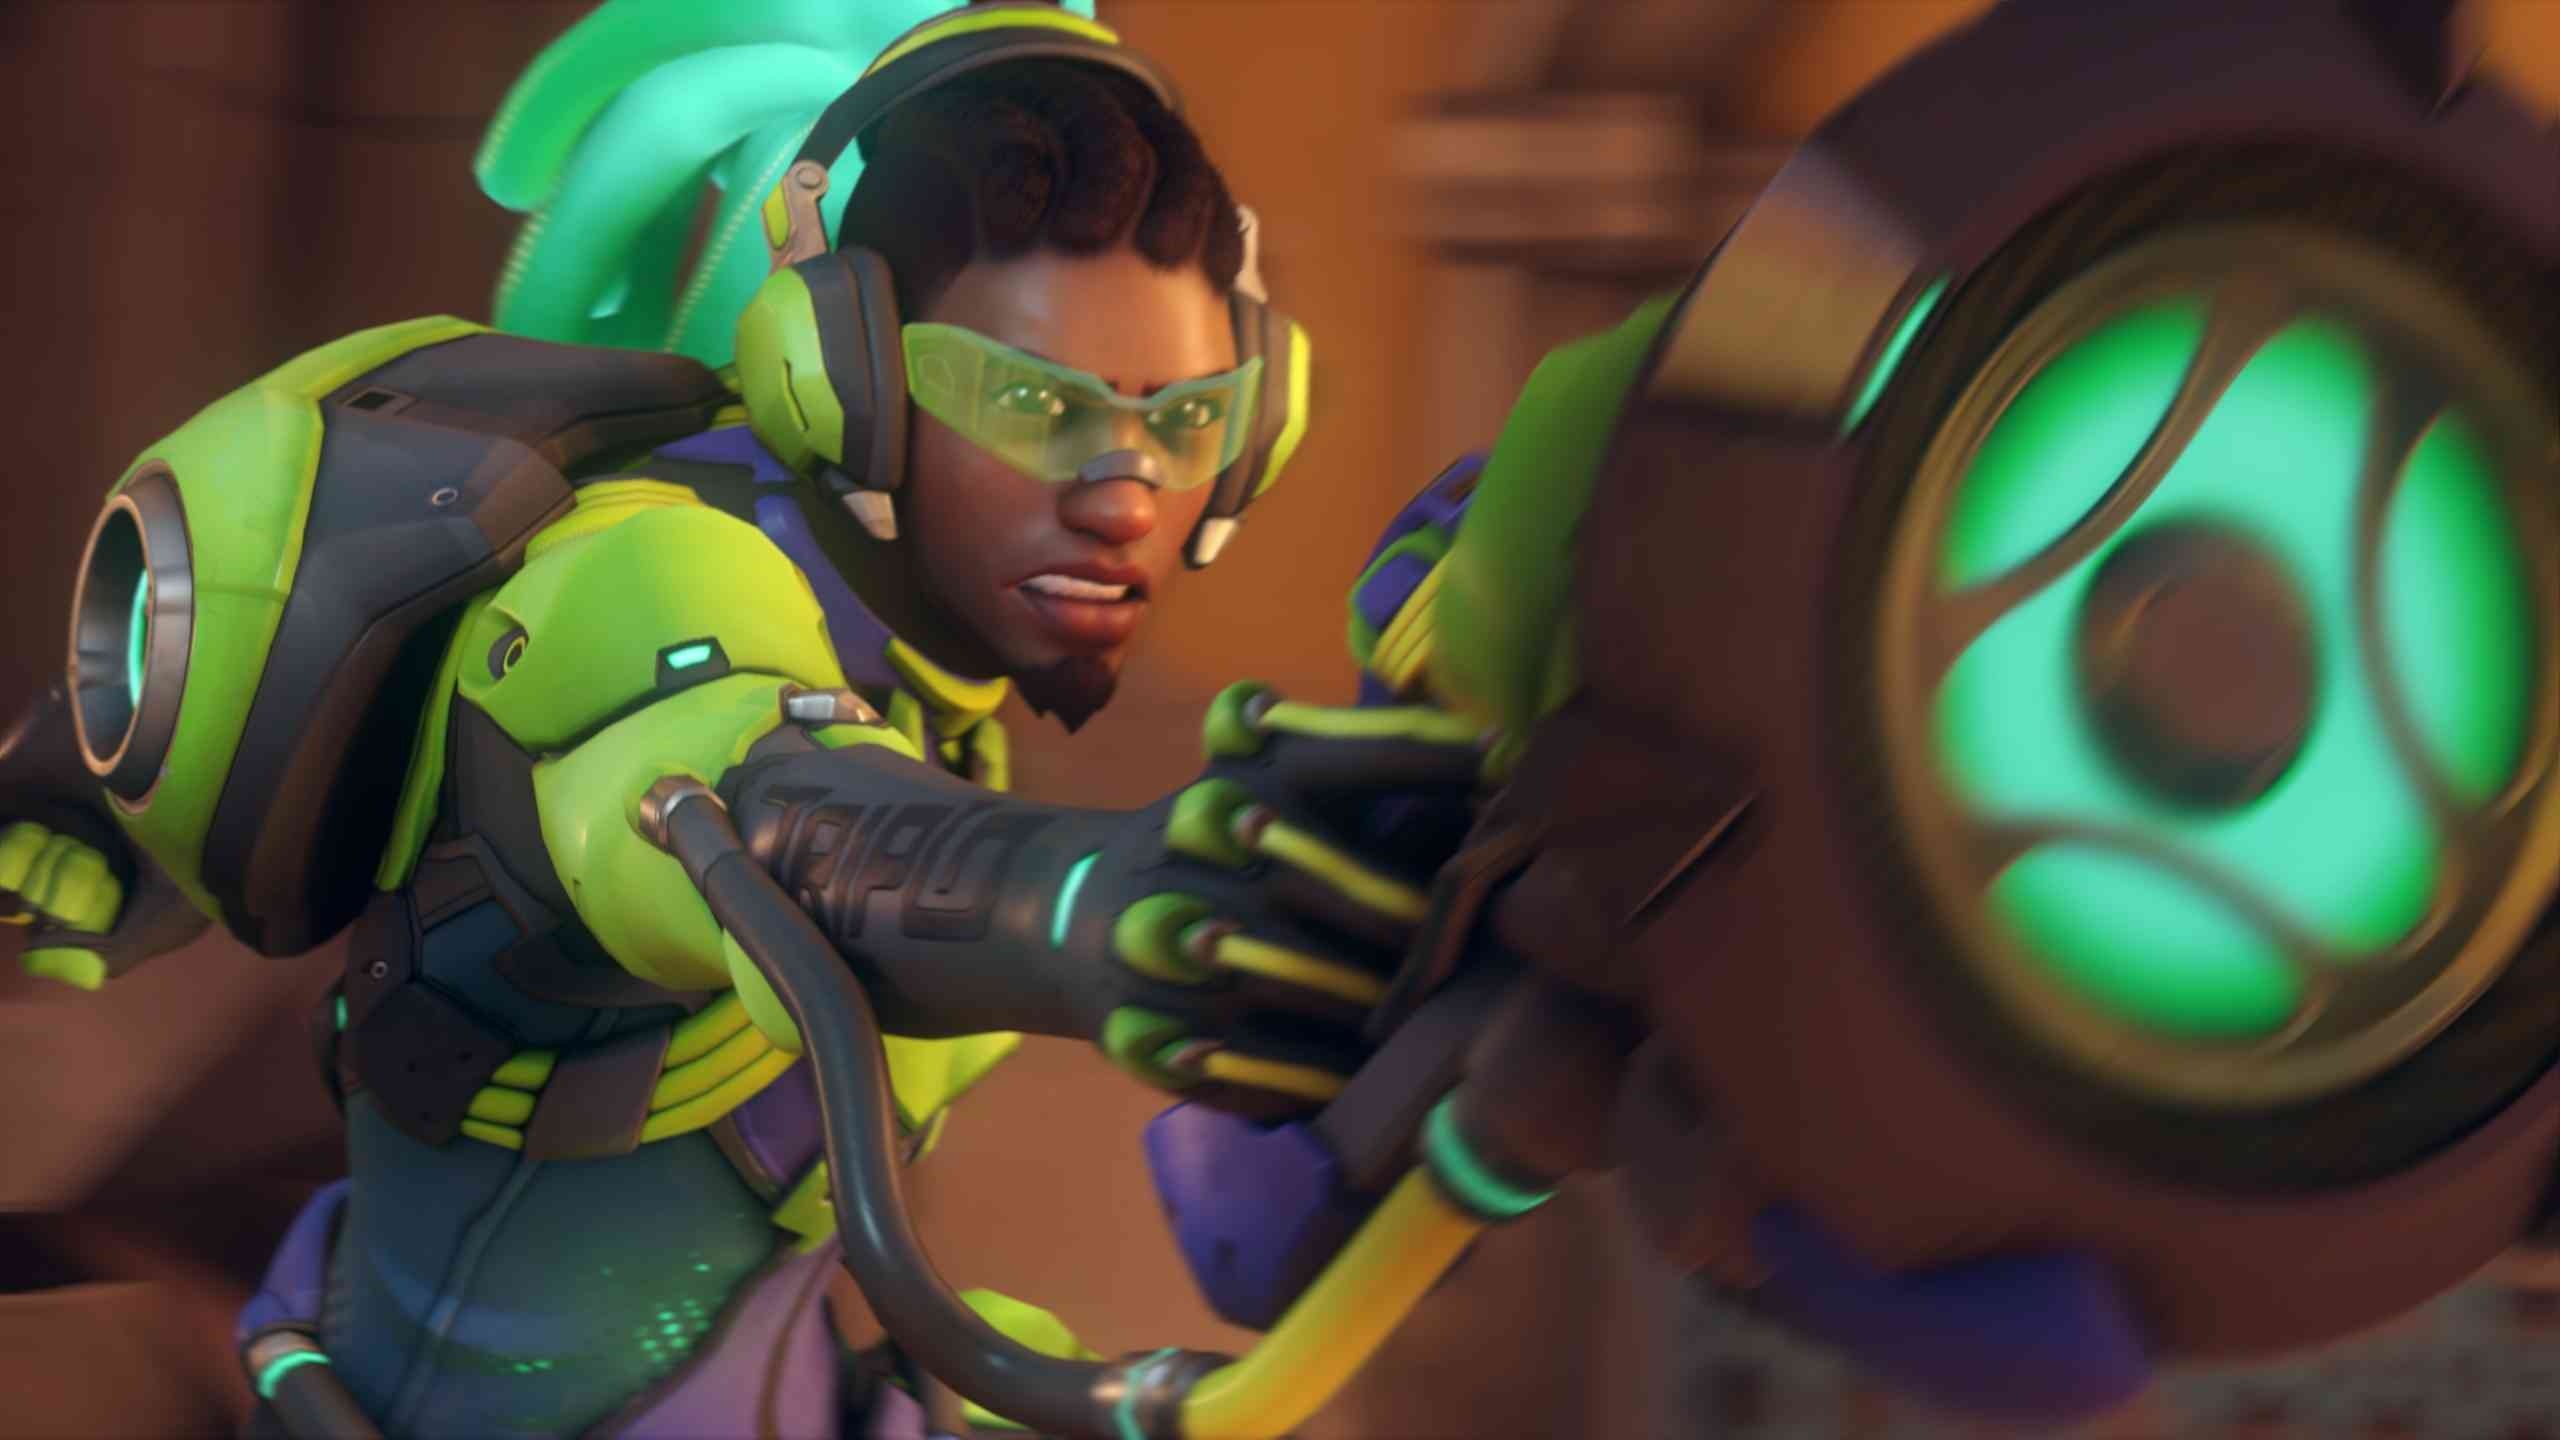 Overwatch executive producer, Chacko Sonny, Blizzard departure, Gaming, 2560x1440 HD Desktop